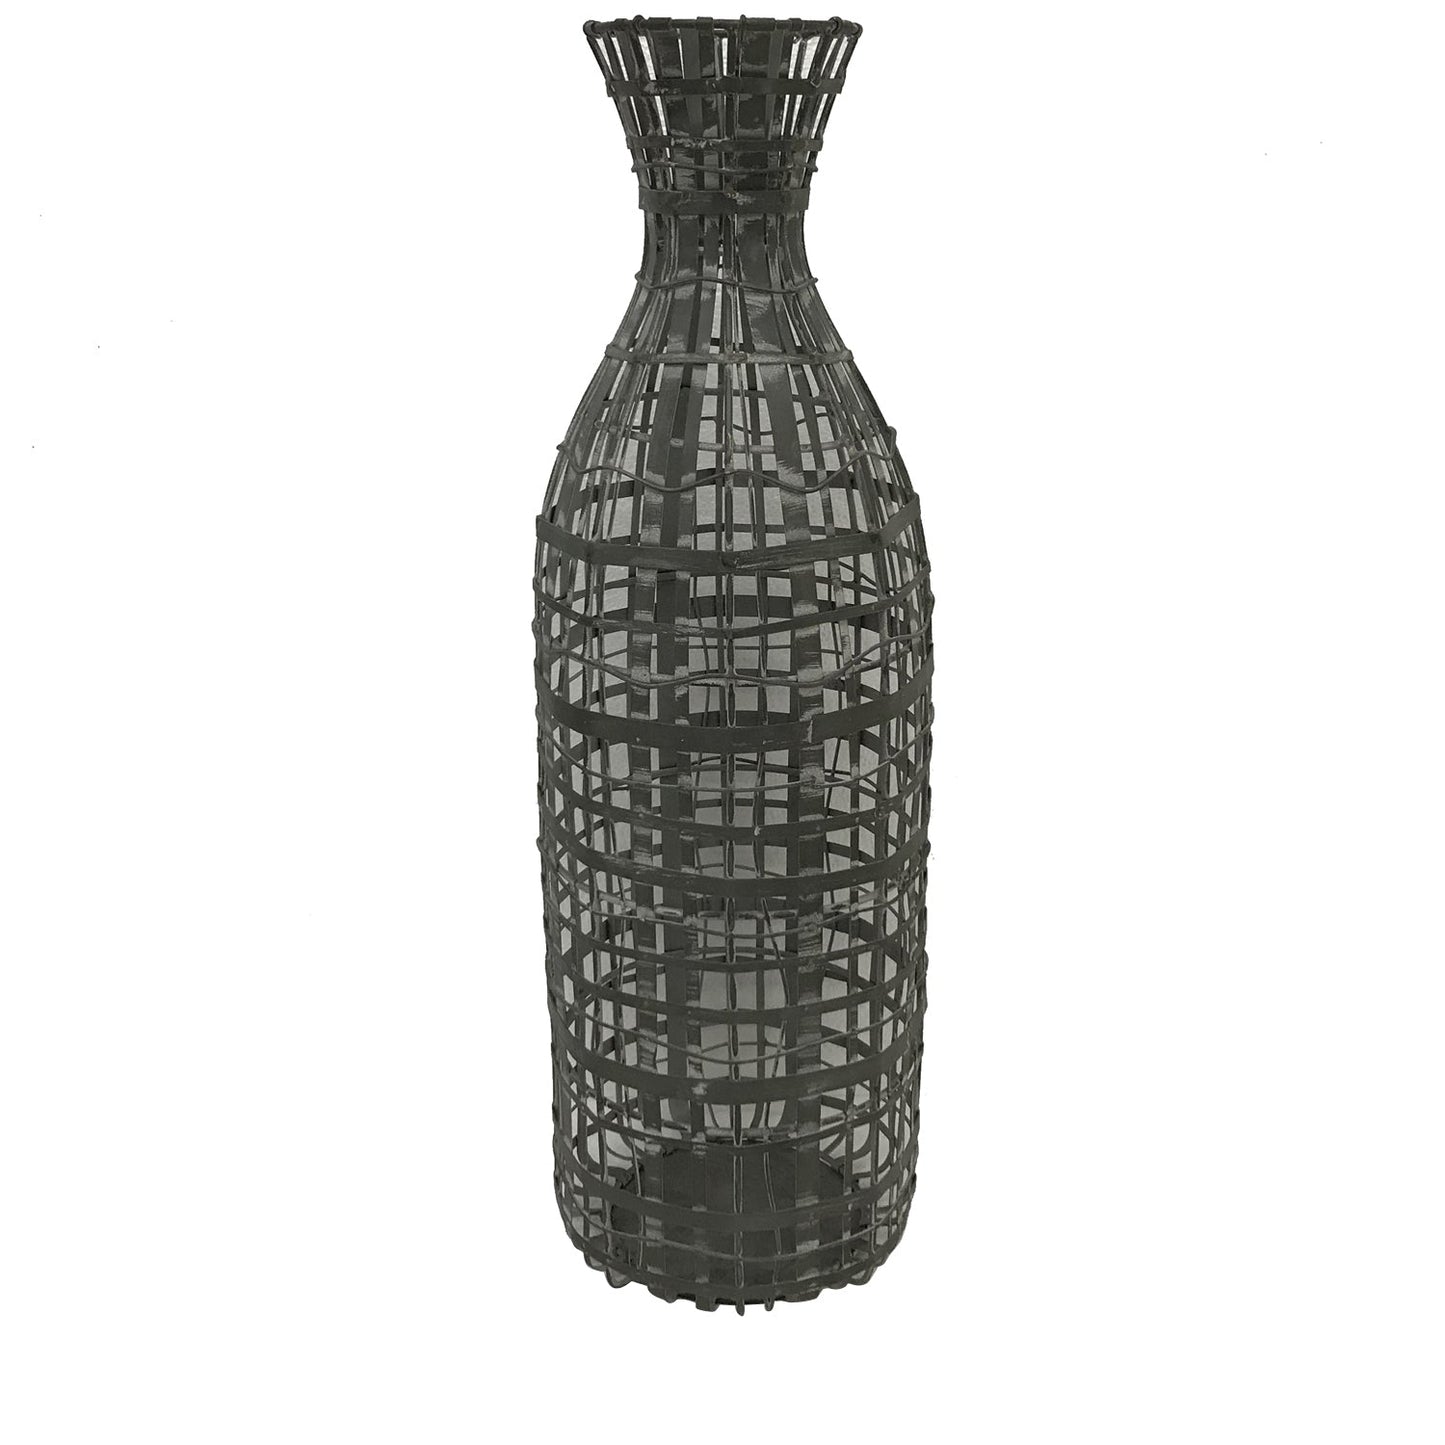 Crestview Collection Clancy 8" x 8" x 26" Rustic Metal Vase In Black Finish